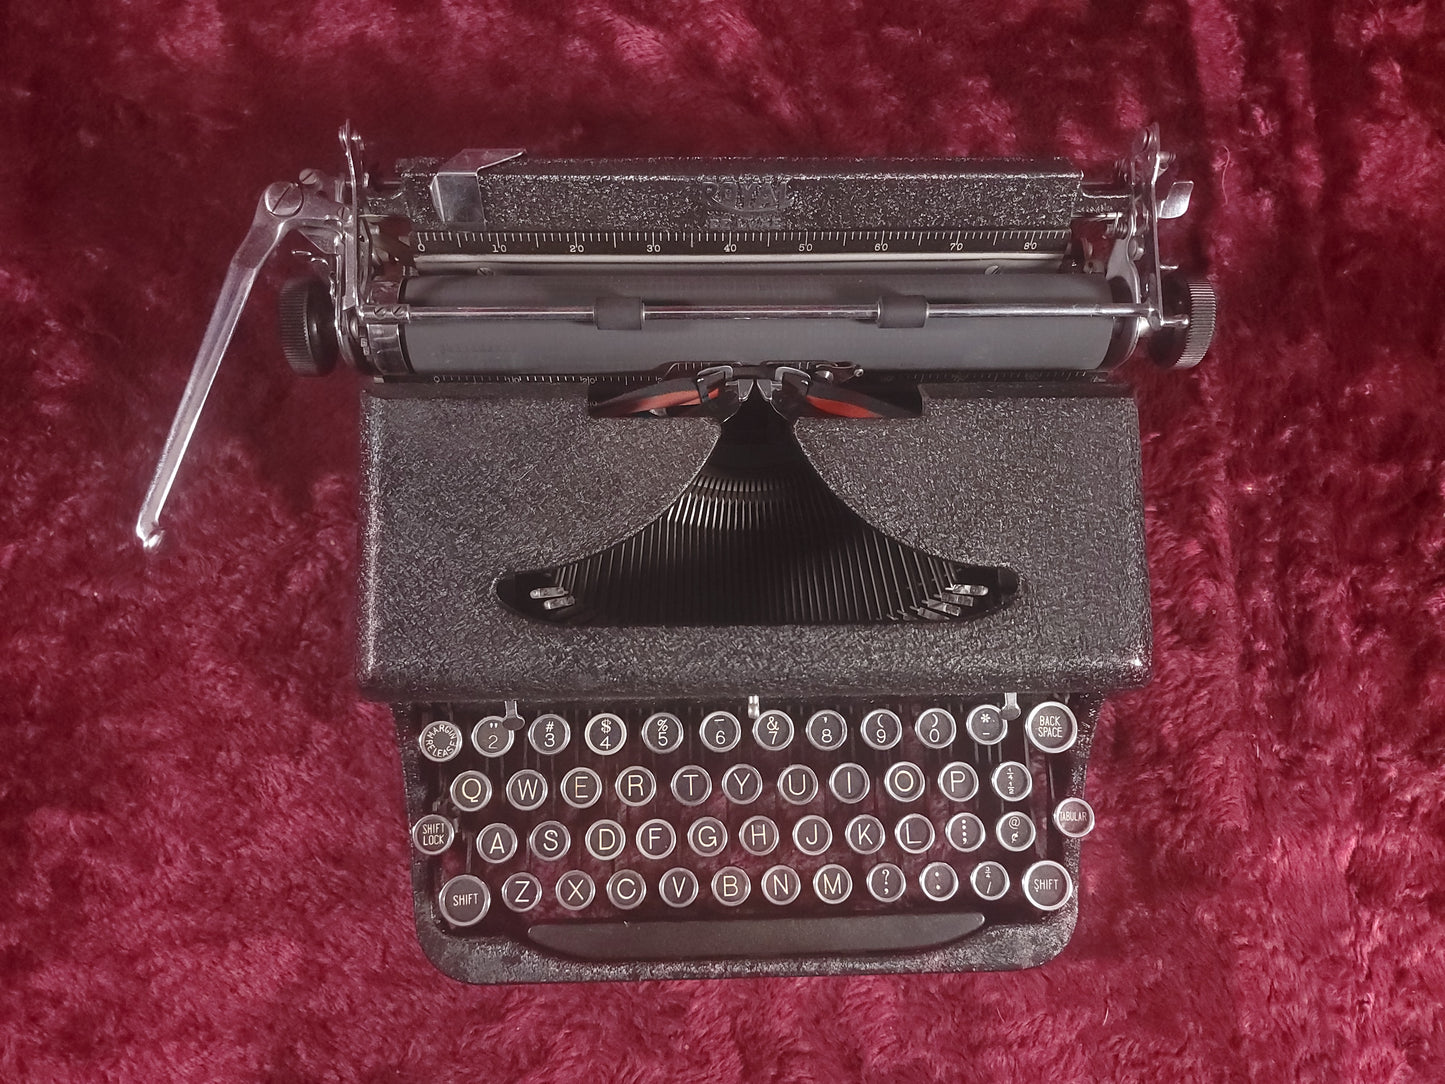 Royal De Luxe Chrome Plated Manual Portable Typewriter with Case, 1936